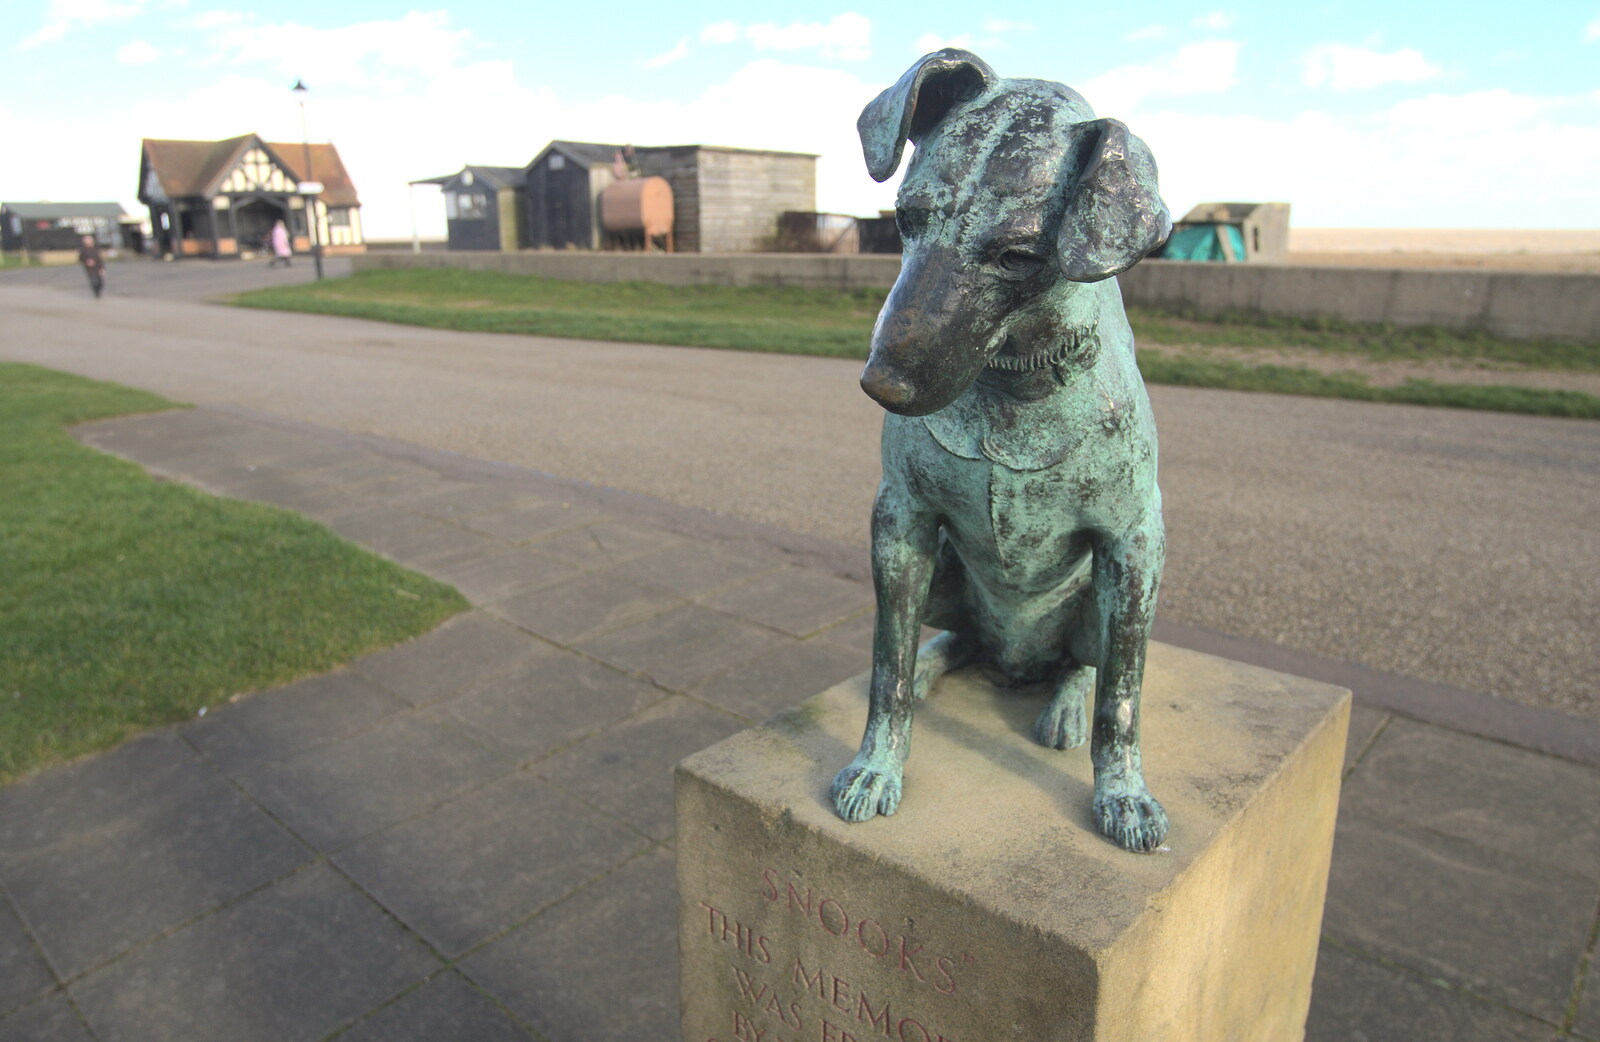 A Trip to Aldeburgh, Suffolk - 7th February 2016: A bronze statue of Snooks the Dog